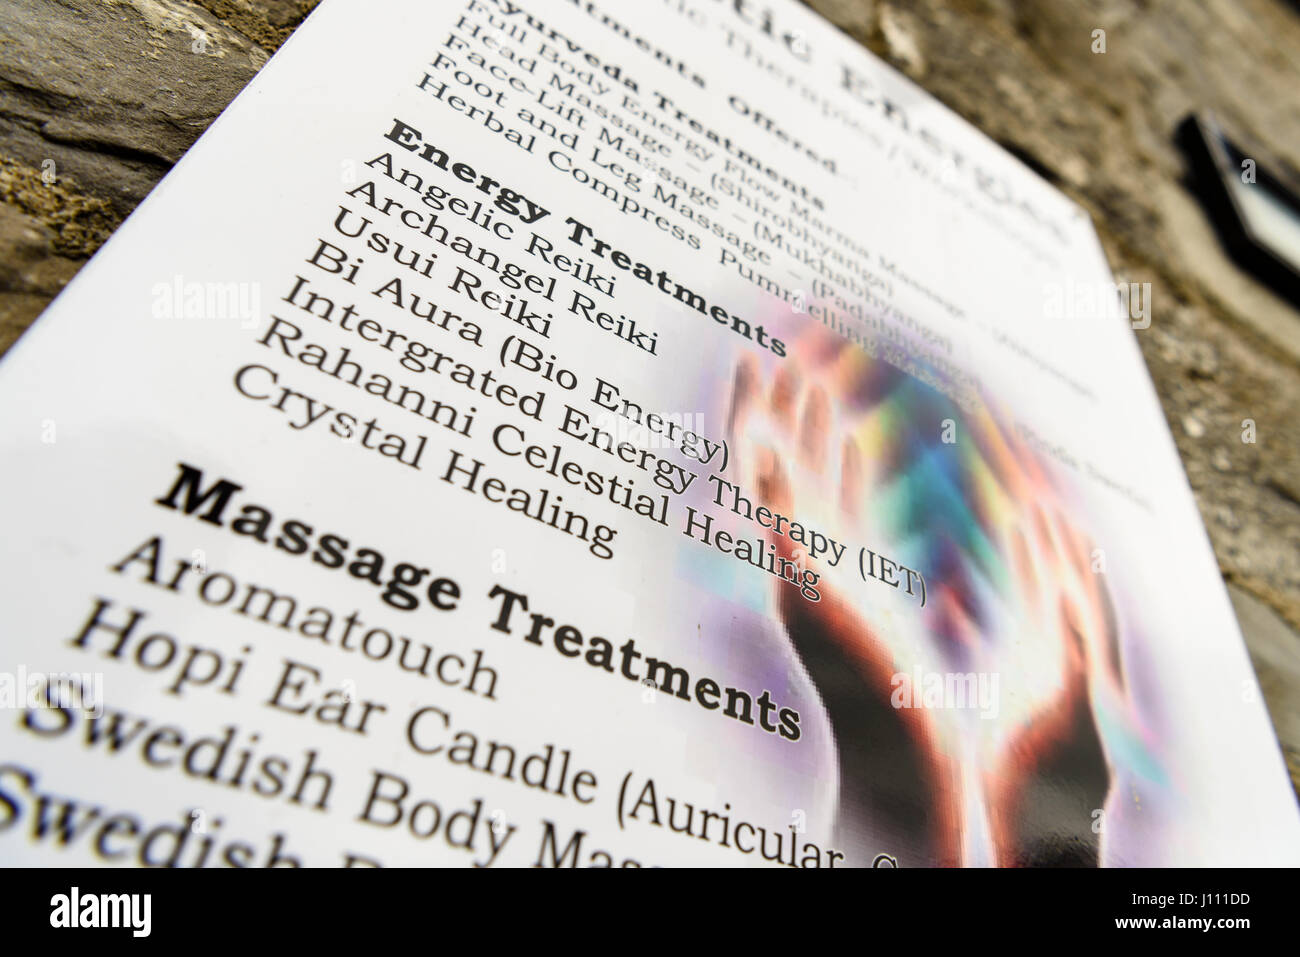 Sign at a 'New Age Therapy Treatment' centre, offering herbal, spiritual and cosmic energy treatments. Stock Photo